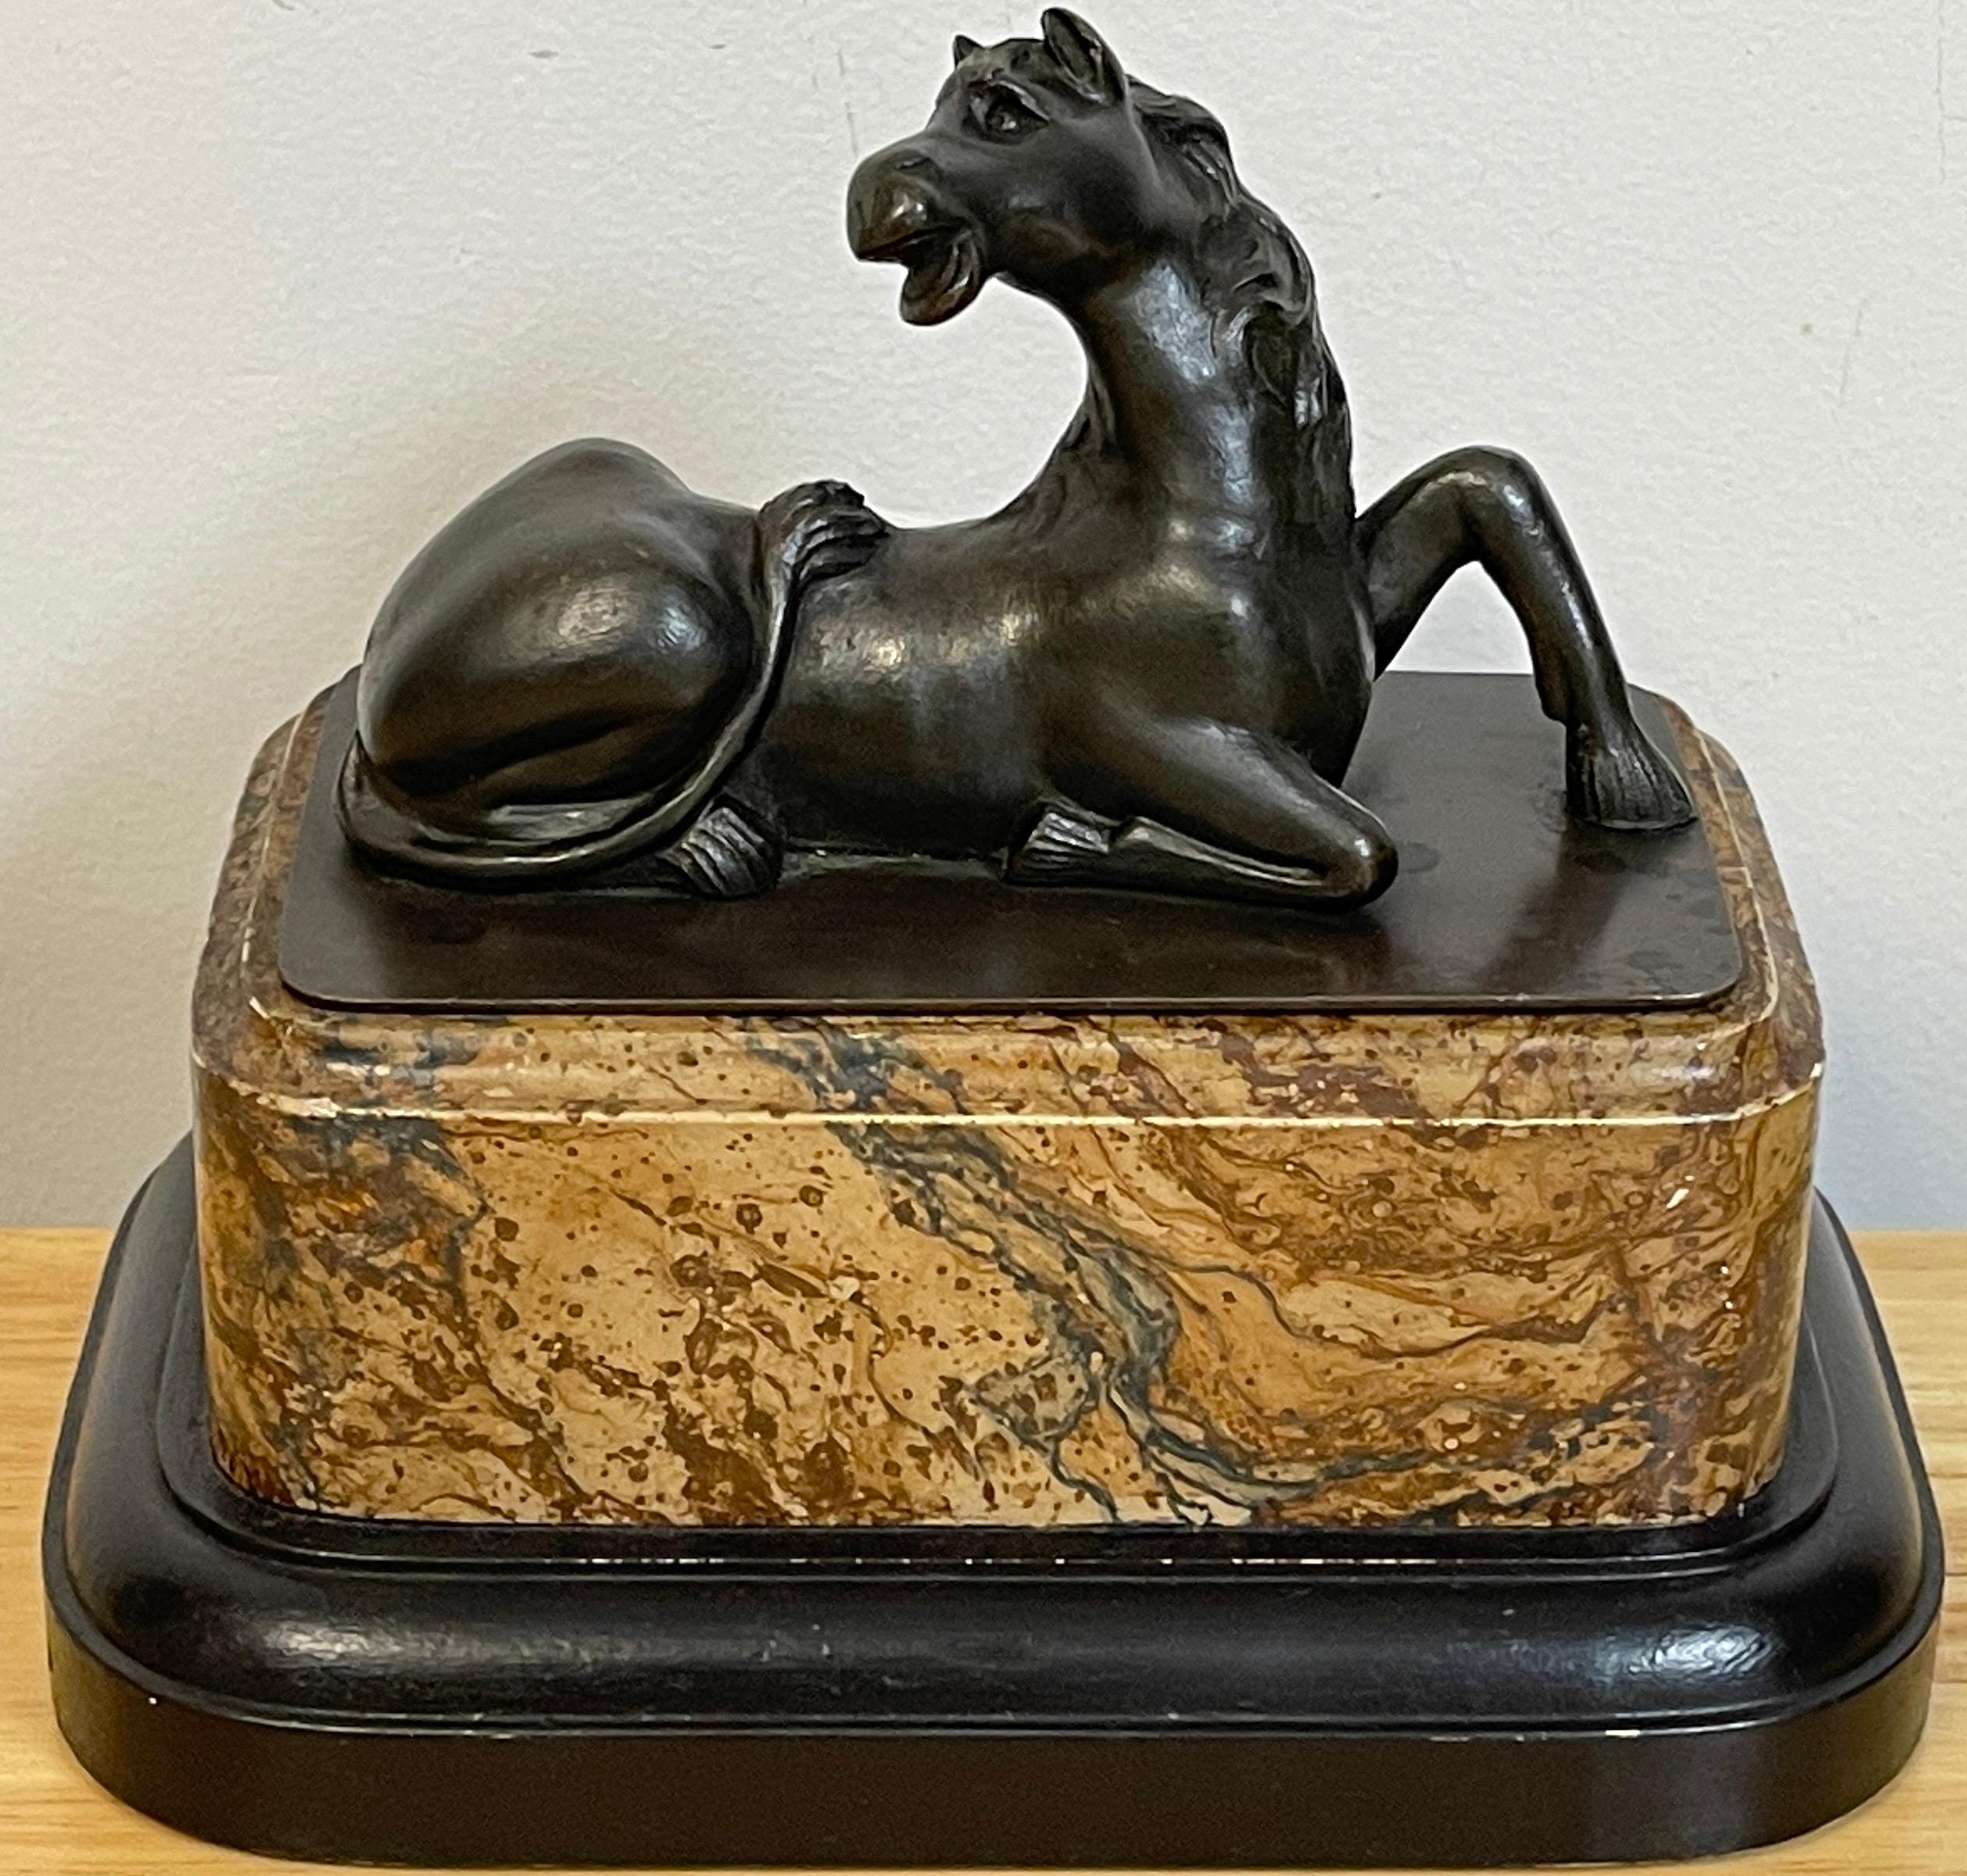 Grand Tour bronze model of a Recumbent horse, realistically cast and modeled, raised on a faux marbleized base.
 